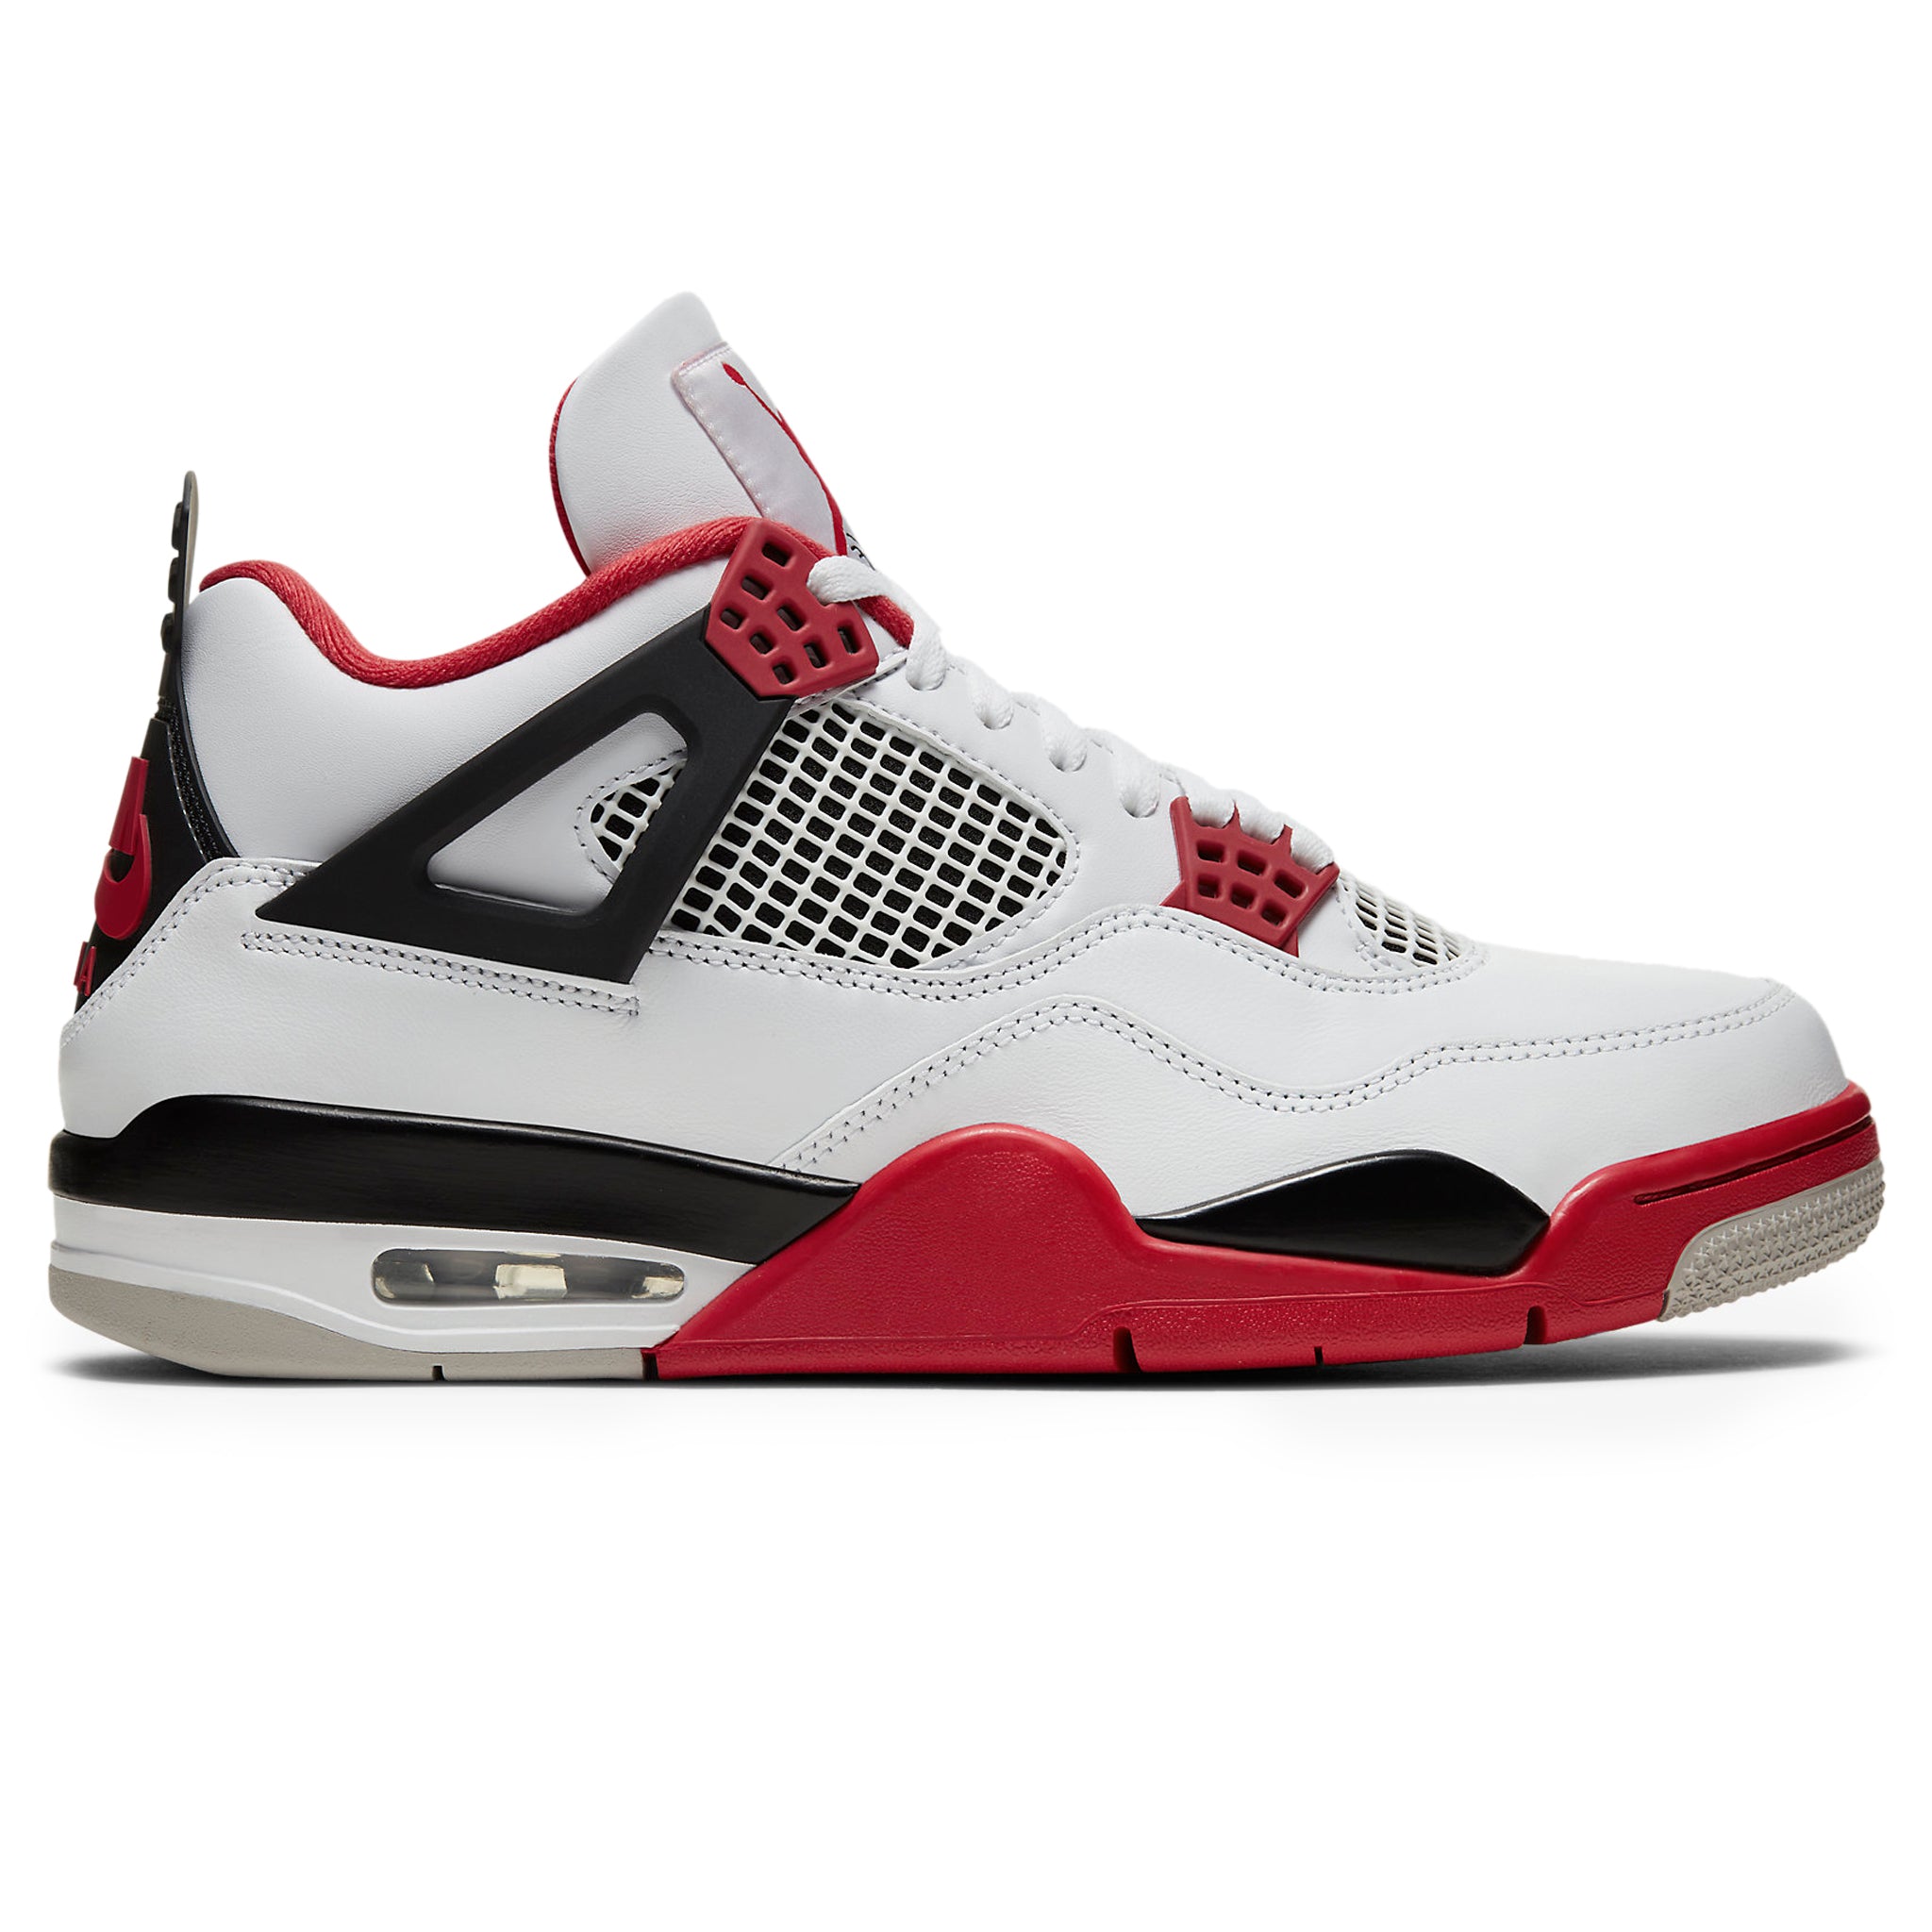 Side view of Air Jordan 4 Retro Fire Red 2020 DC7770-160